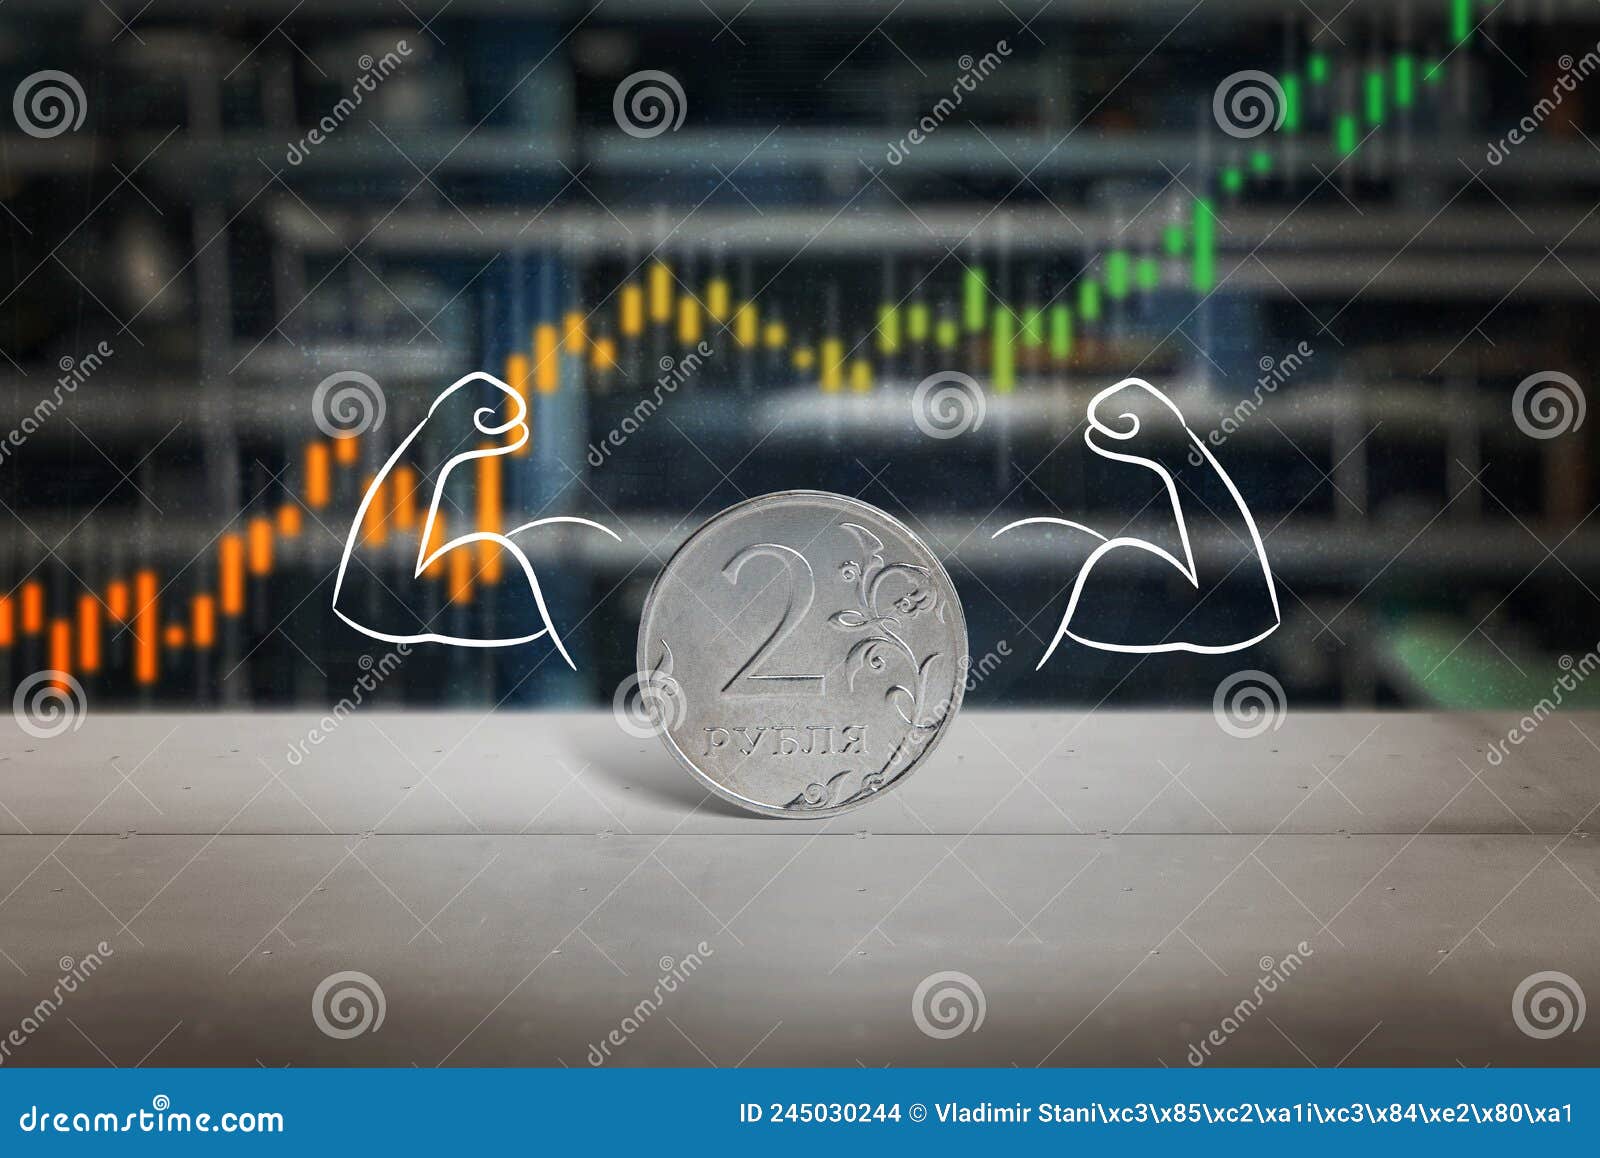 coin of russian ruble with hands and muscles concept. strengthening and growth of the value of the russian currency